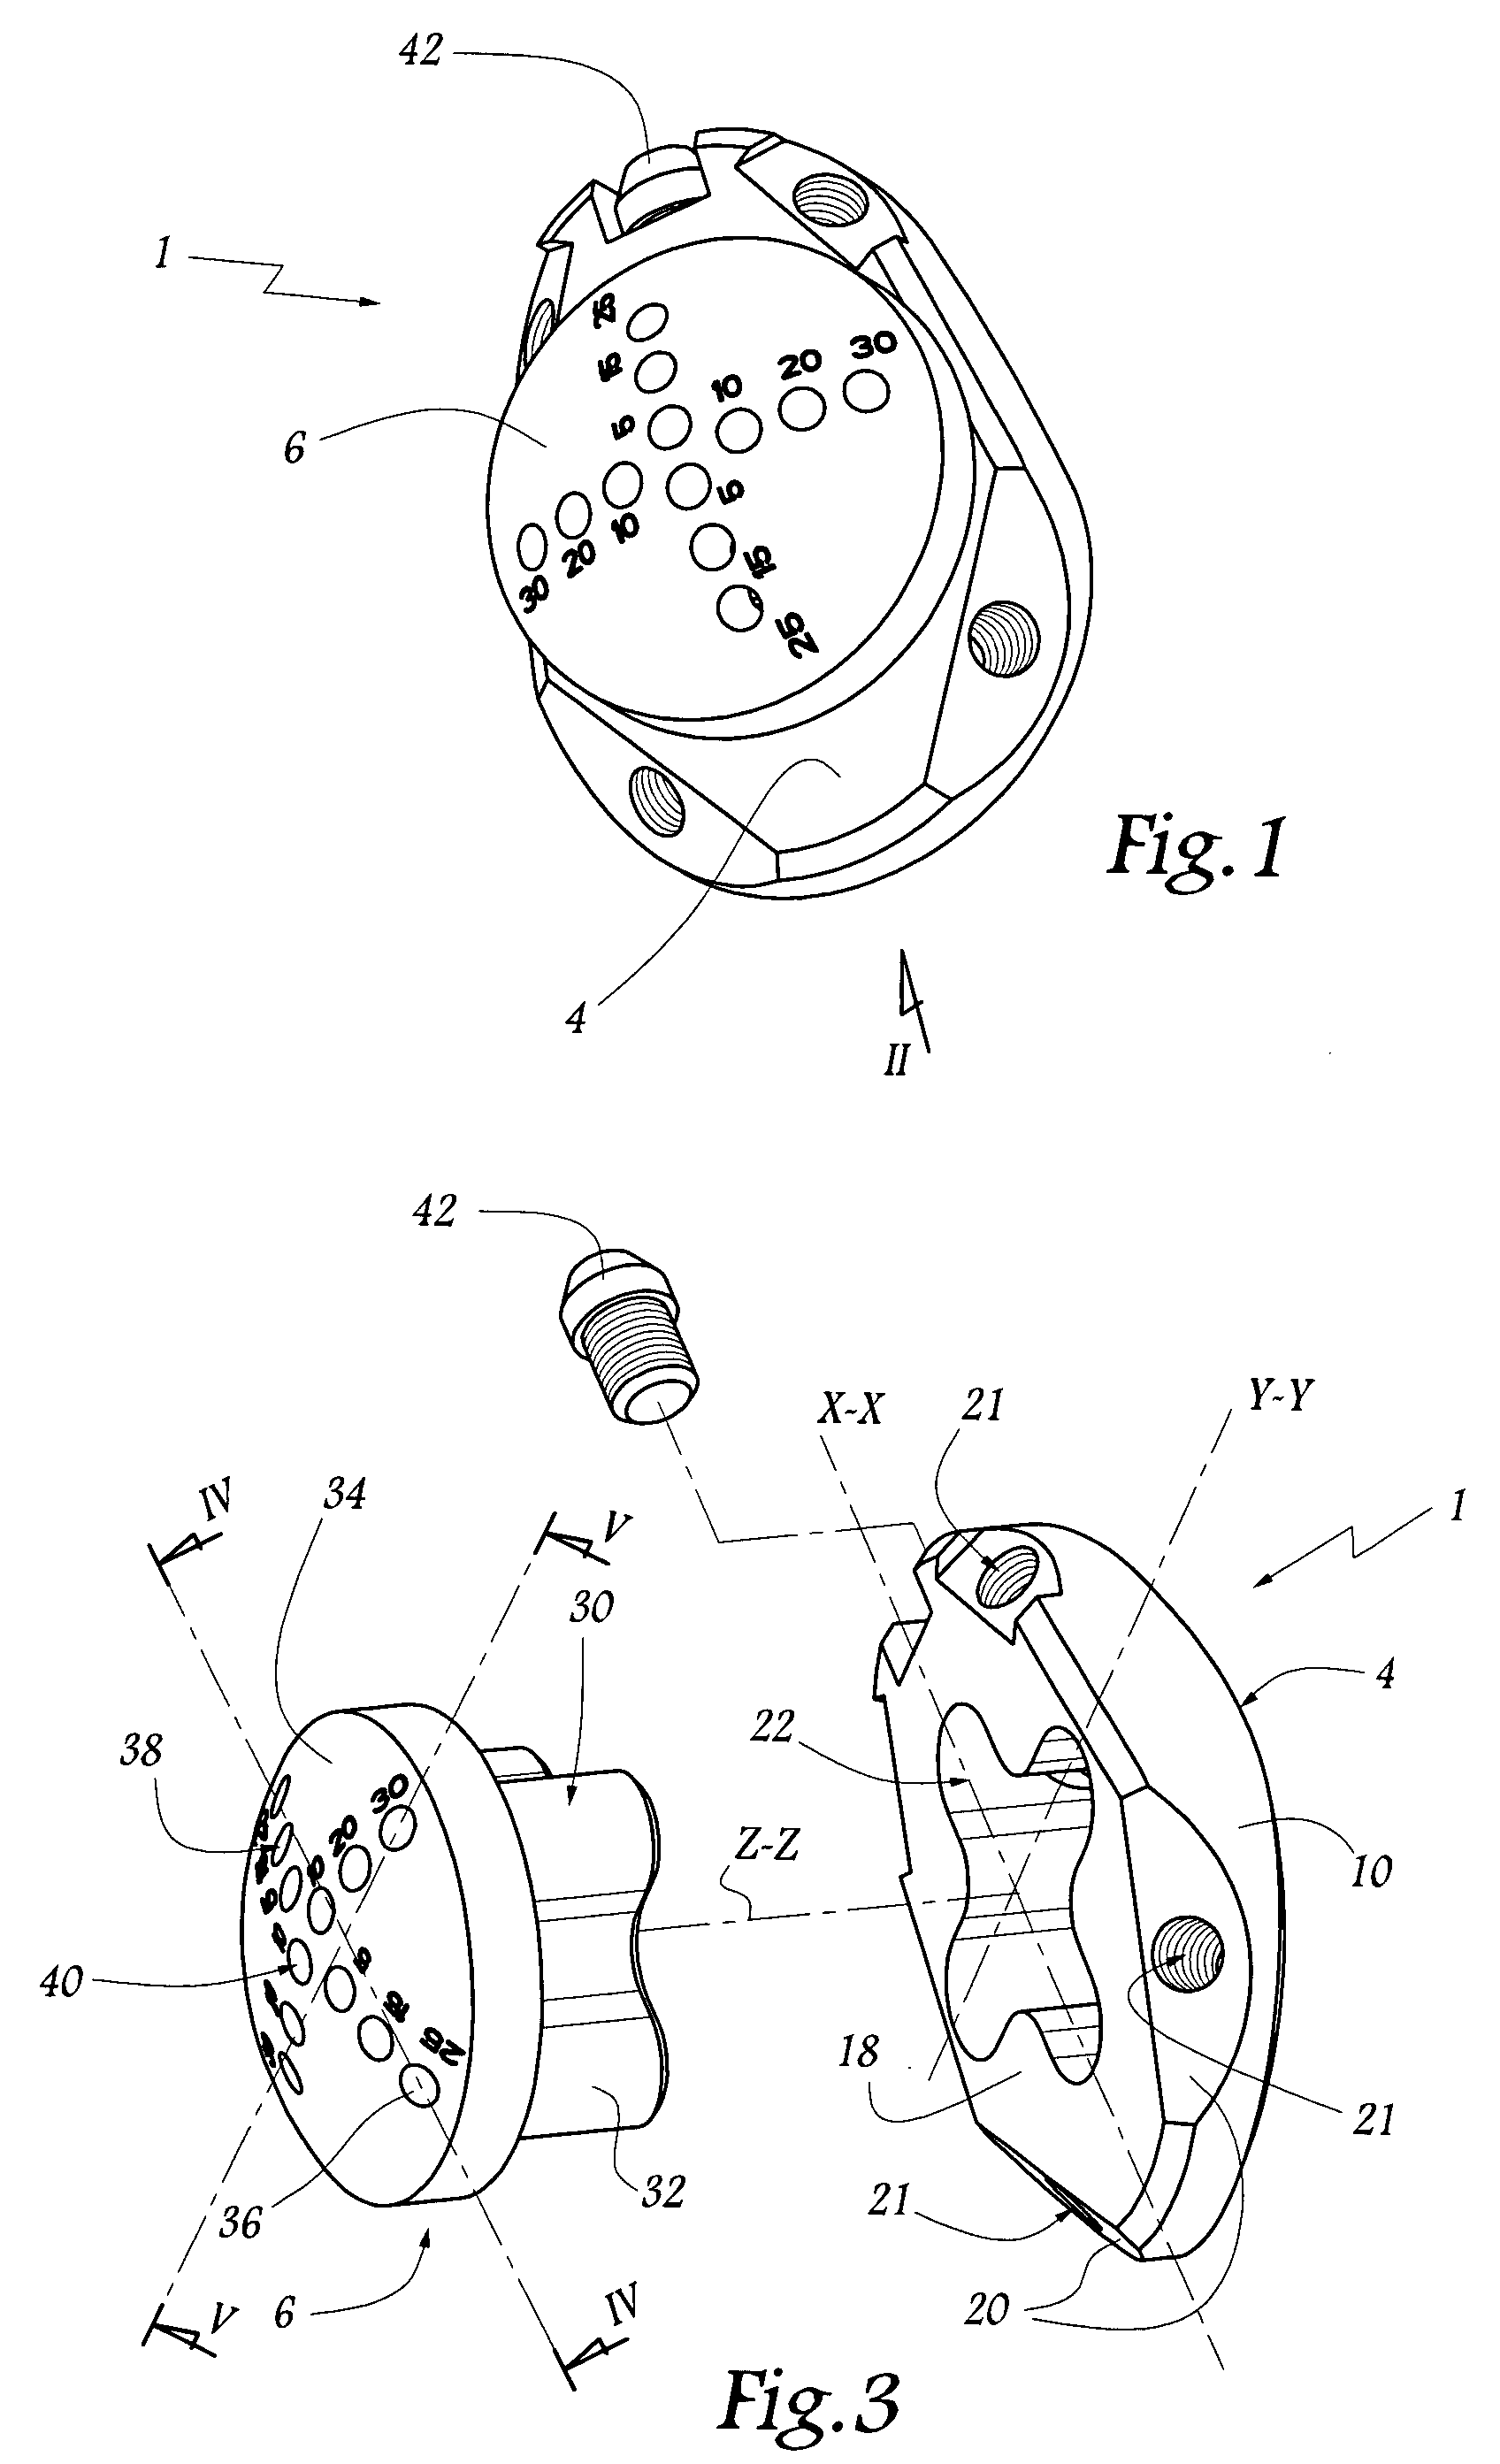 Ancillary tool for positioning a glenoid implant